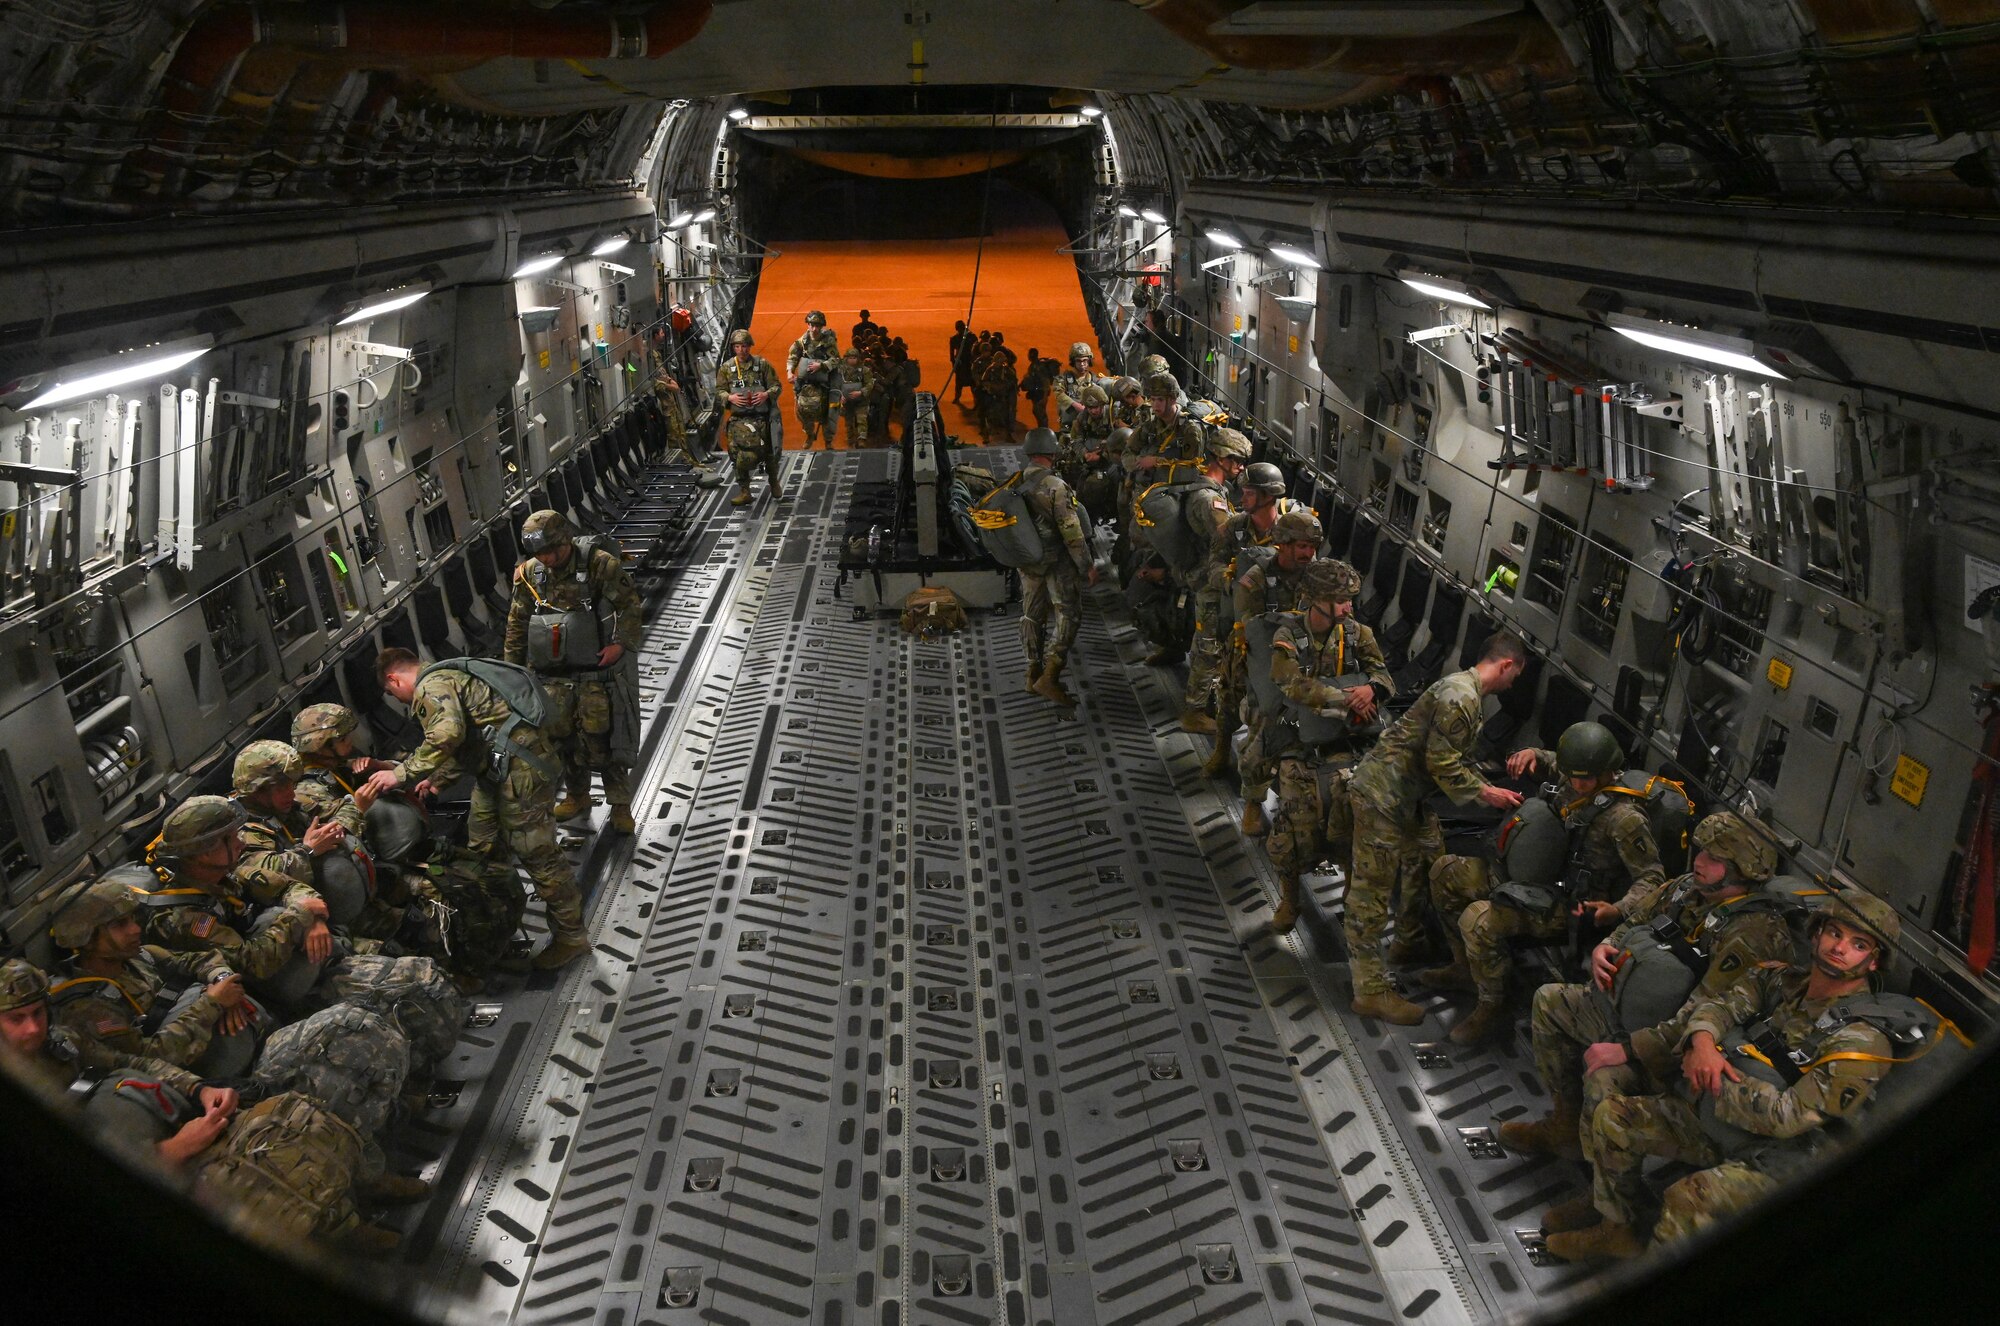 U.S. Army Soldiers from Fort Cavazos, Texas, board a C-17 Globemaster III at Fort Cavazos, Texas, June 2, 2023.Airmen from the 58th Airlift Squadron flew two C-17s to Fort Cavazos to transport 100 Soldiers to a drop zone and perform a static line drop of bundle packages and personnel. (U.S. Air Force photo by Airman 1st Class Miyah Gray)